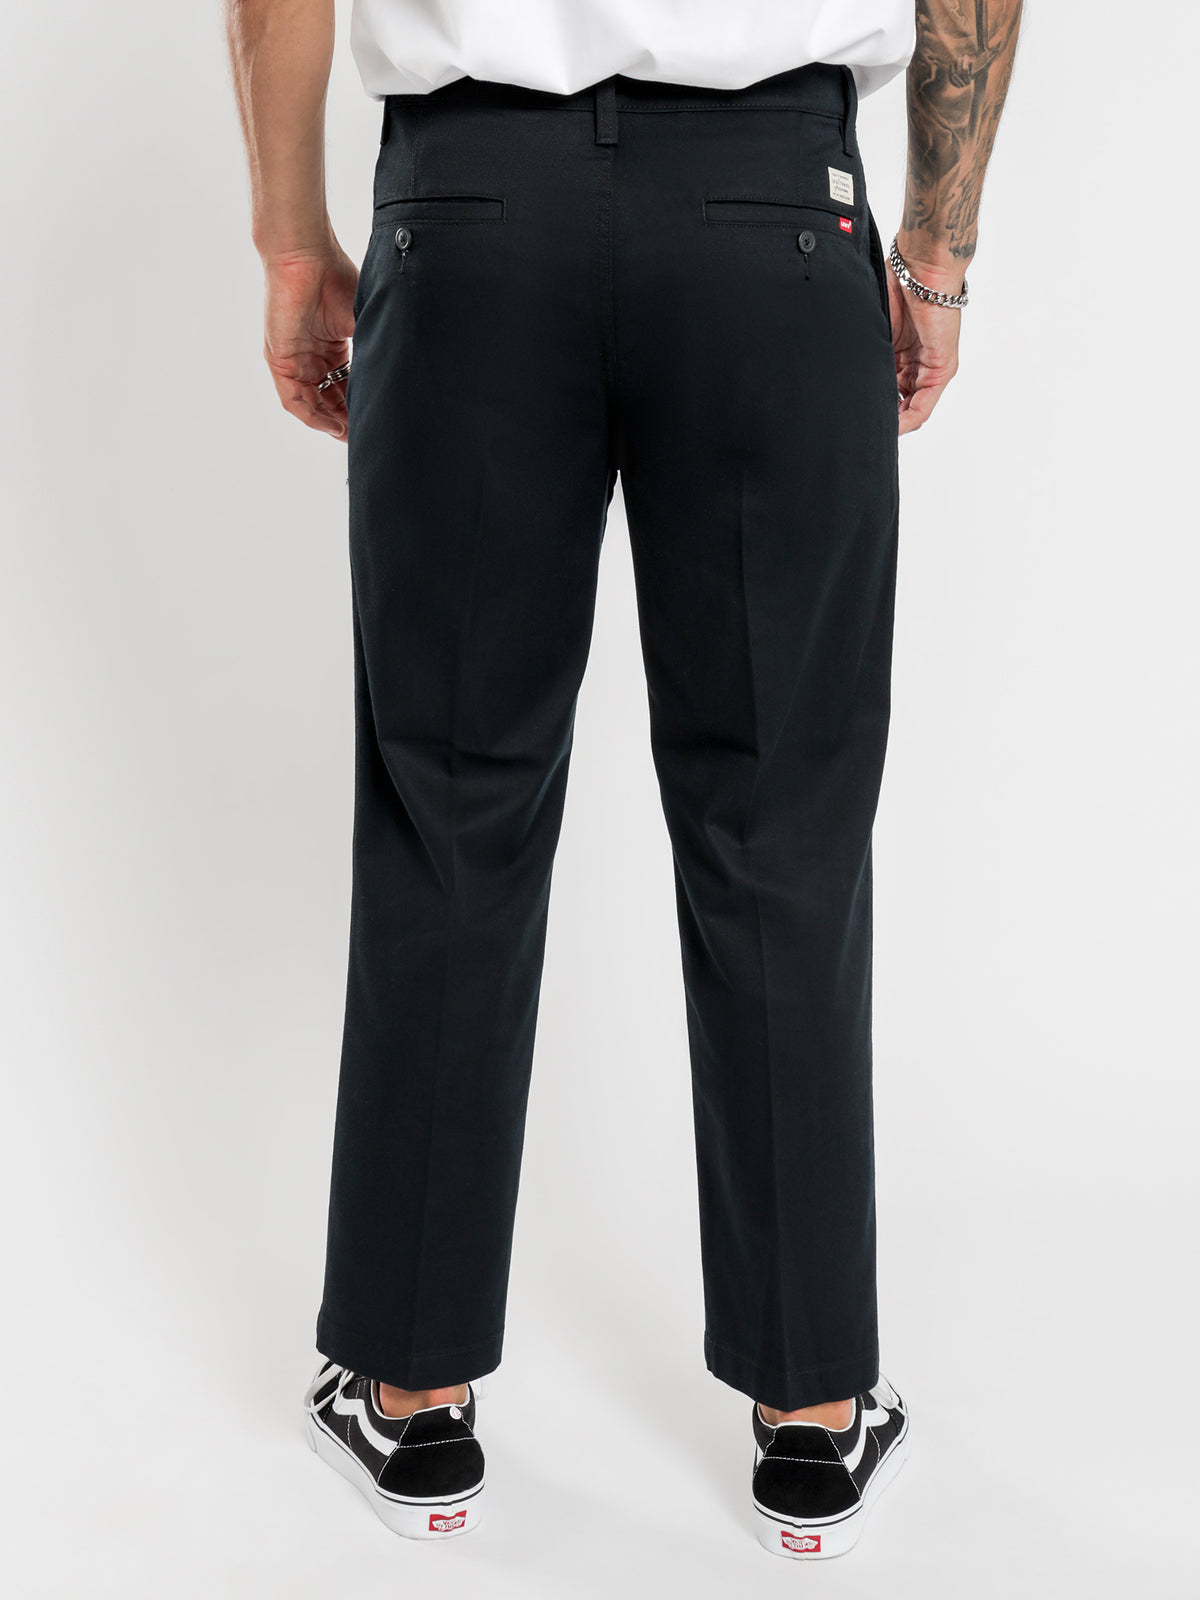 XX Chino Straight Cropped Pants in Black